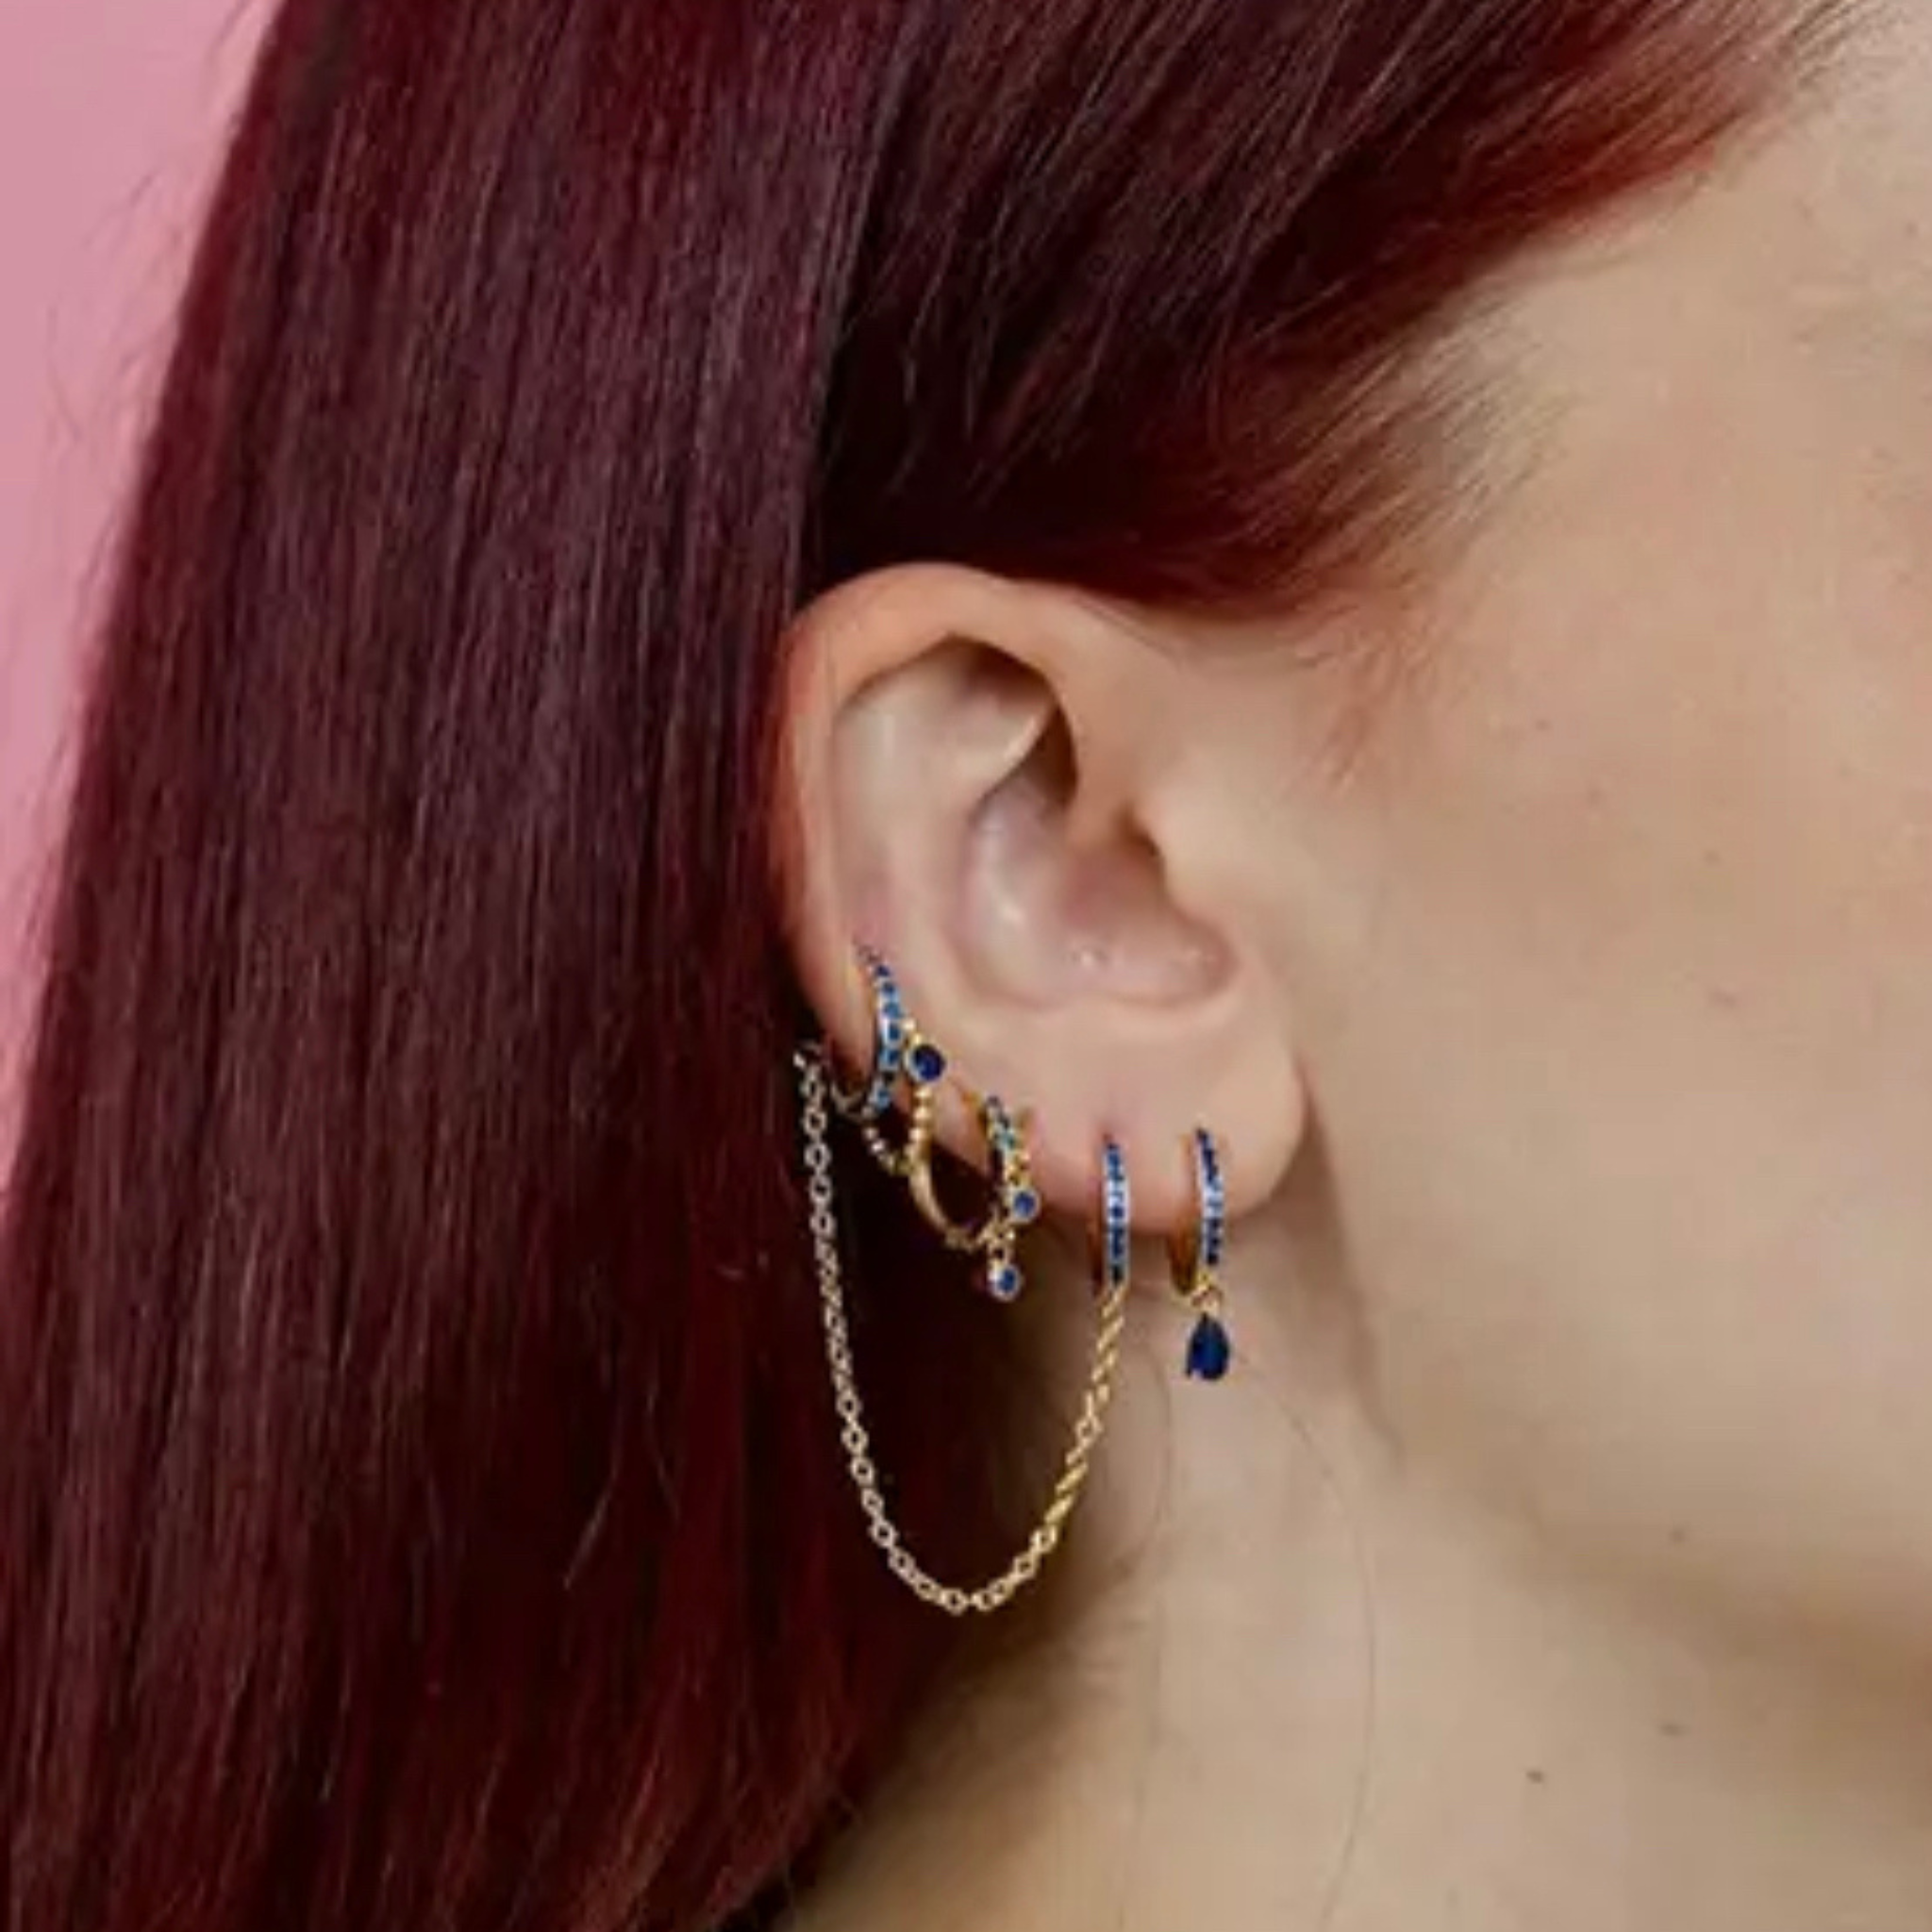 Blue 4 piece earring stack